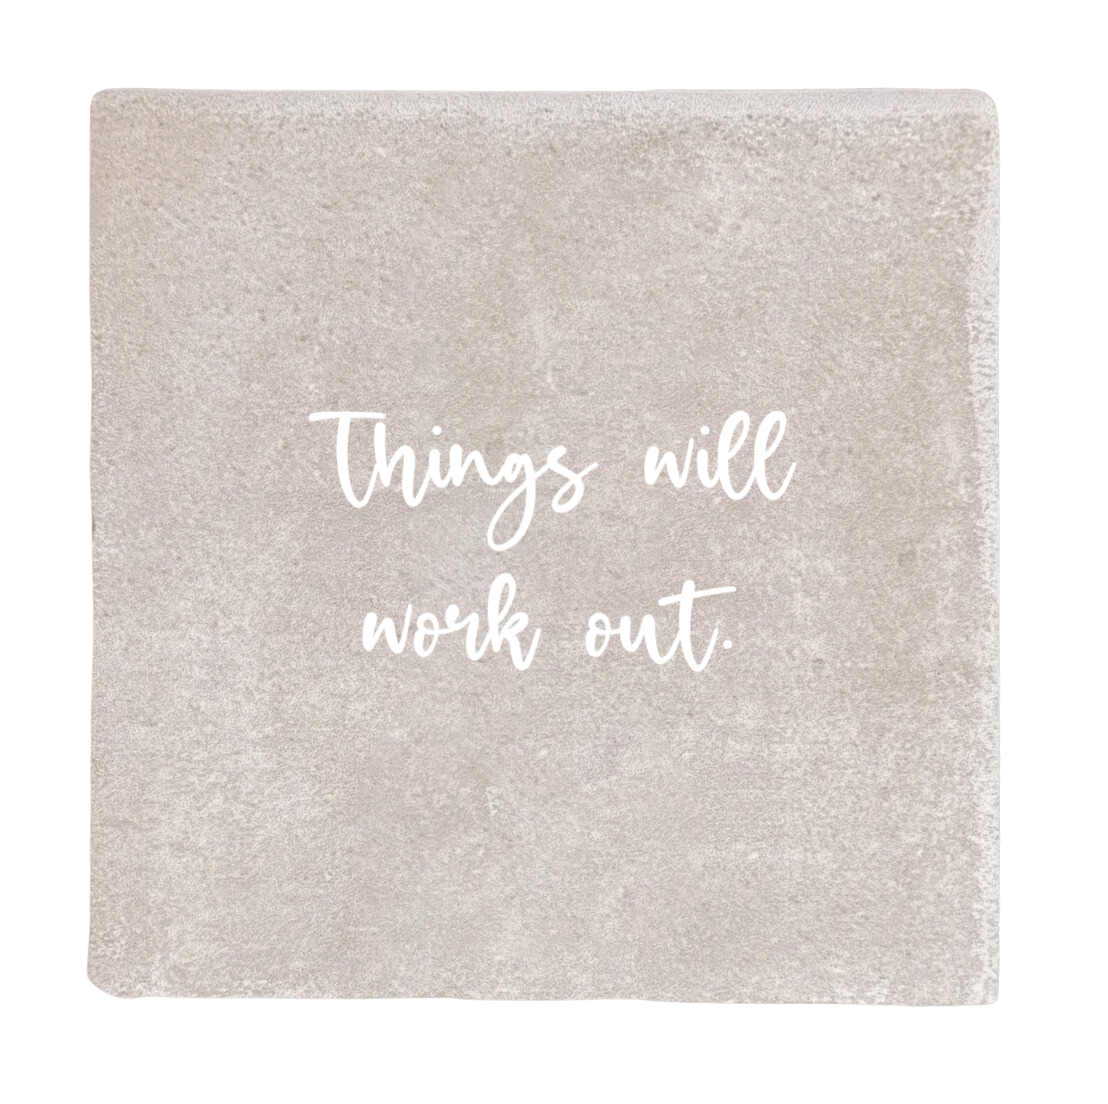 Label2X Tegeltje things will work out woonaccessoires homedecoratie